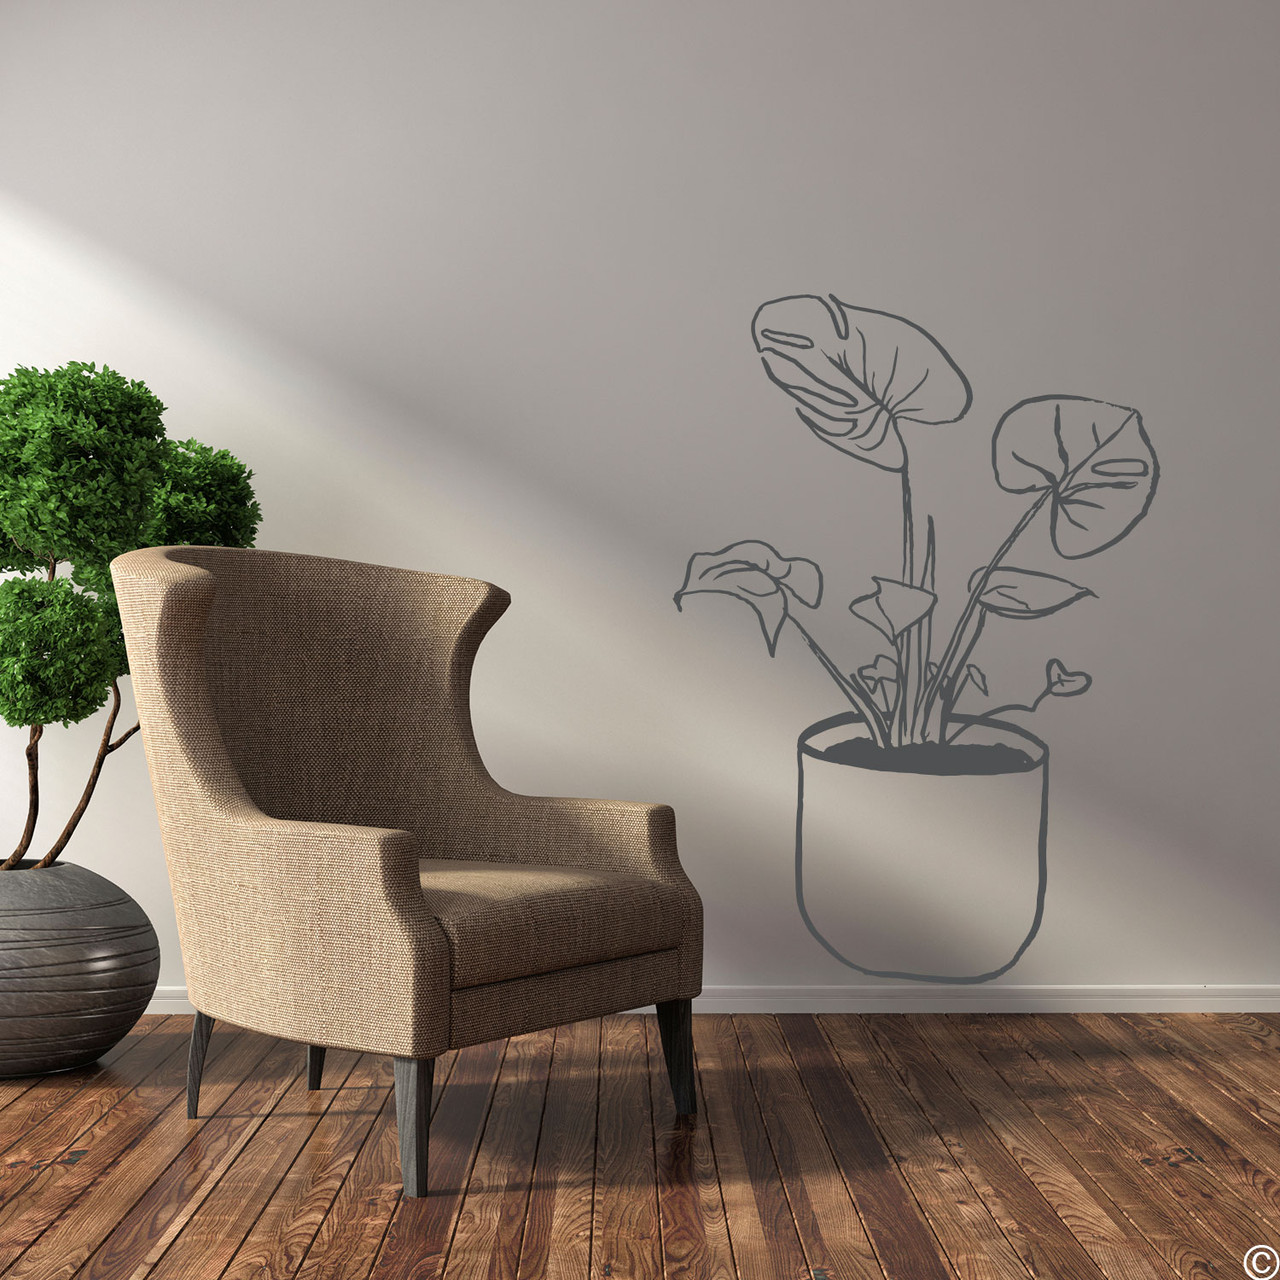 The hand drawn Swiss cheese potted plant wall decal in dark grey vinyl.